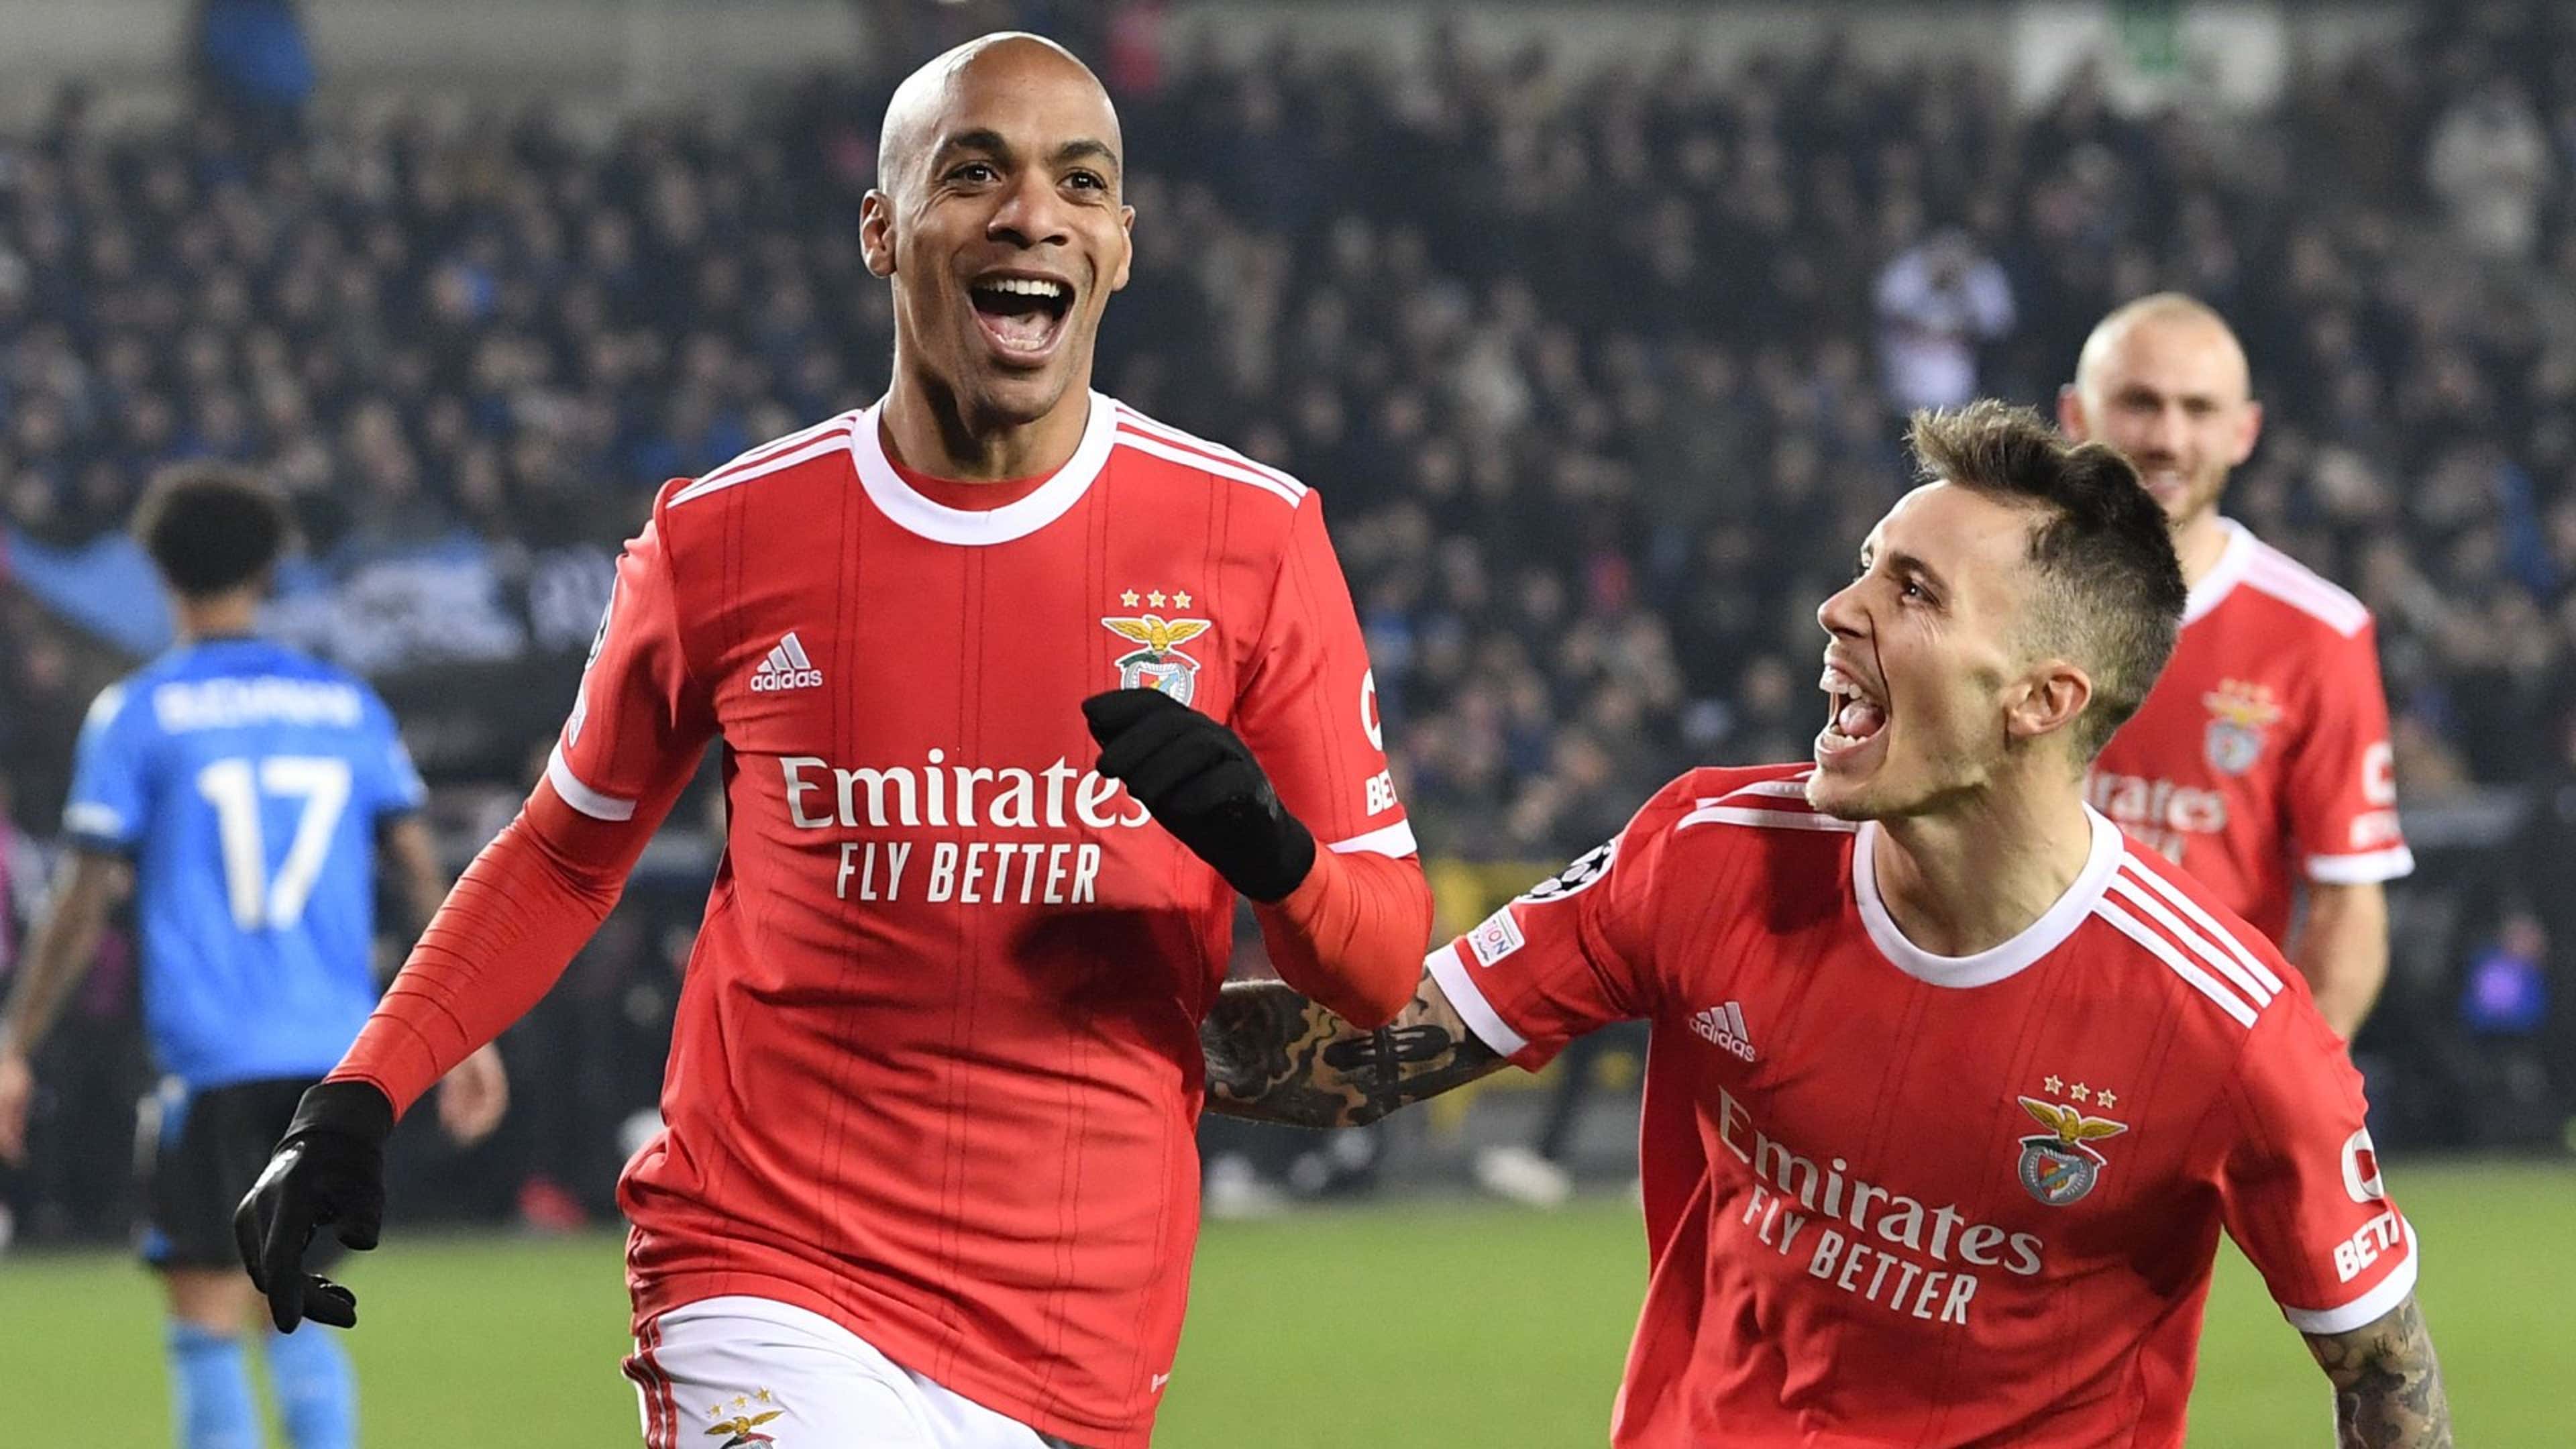 Opdater Akrobatik synder Advantage Benfica! Portuguese giants take two-goal aggregate lead in Club  Brugge Champions League tie | Goal.com US